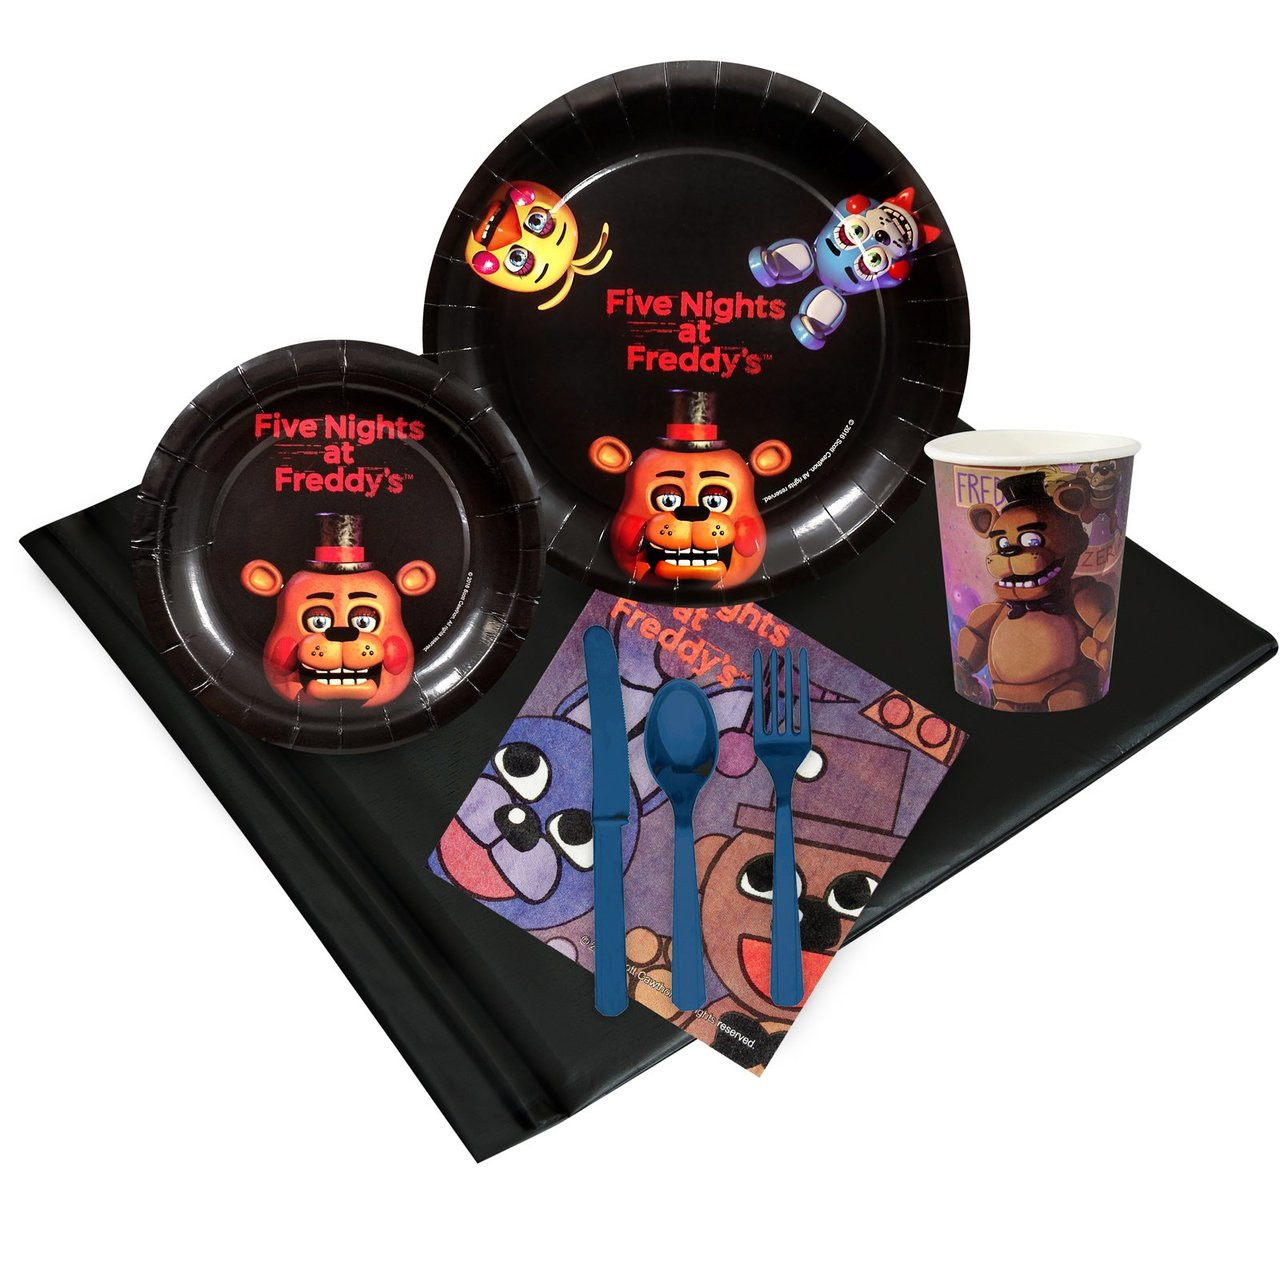 Five Nights at Freddy's Party Supplies in Five Nights at Freddy's 